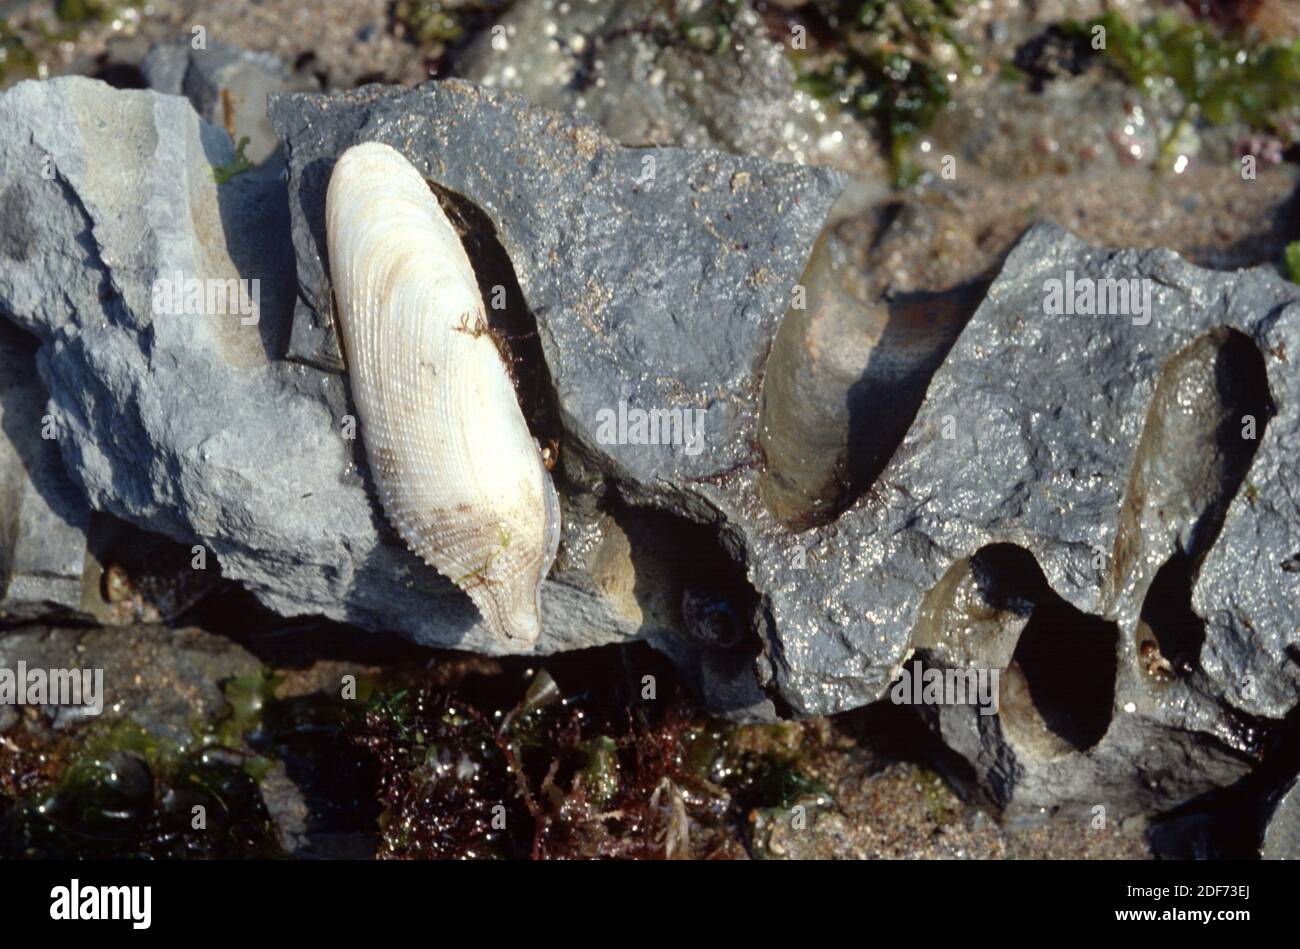 Perforated limestone rock by activity of common piddock (Pholas dactylus). This photo was taken in Saint Jean de luz coast, France. Stock Photo